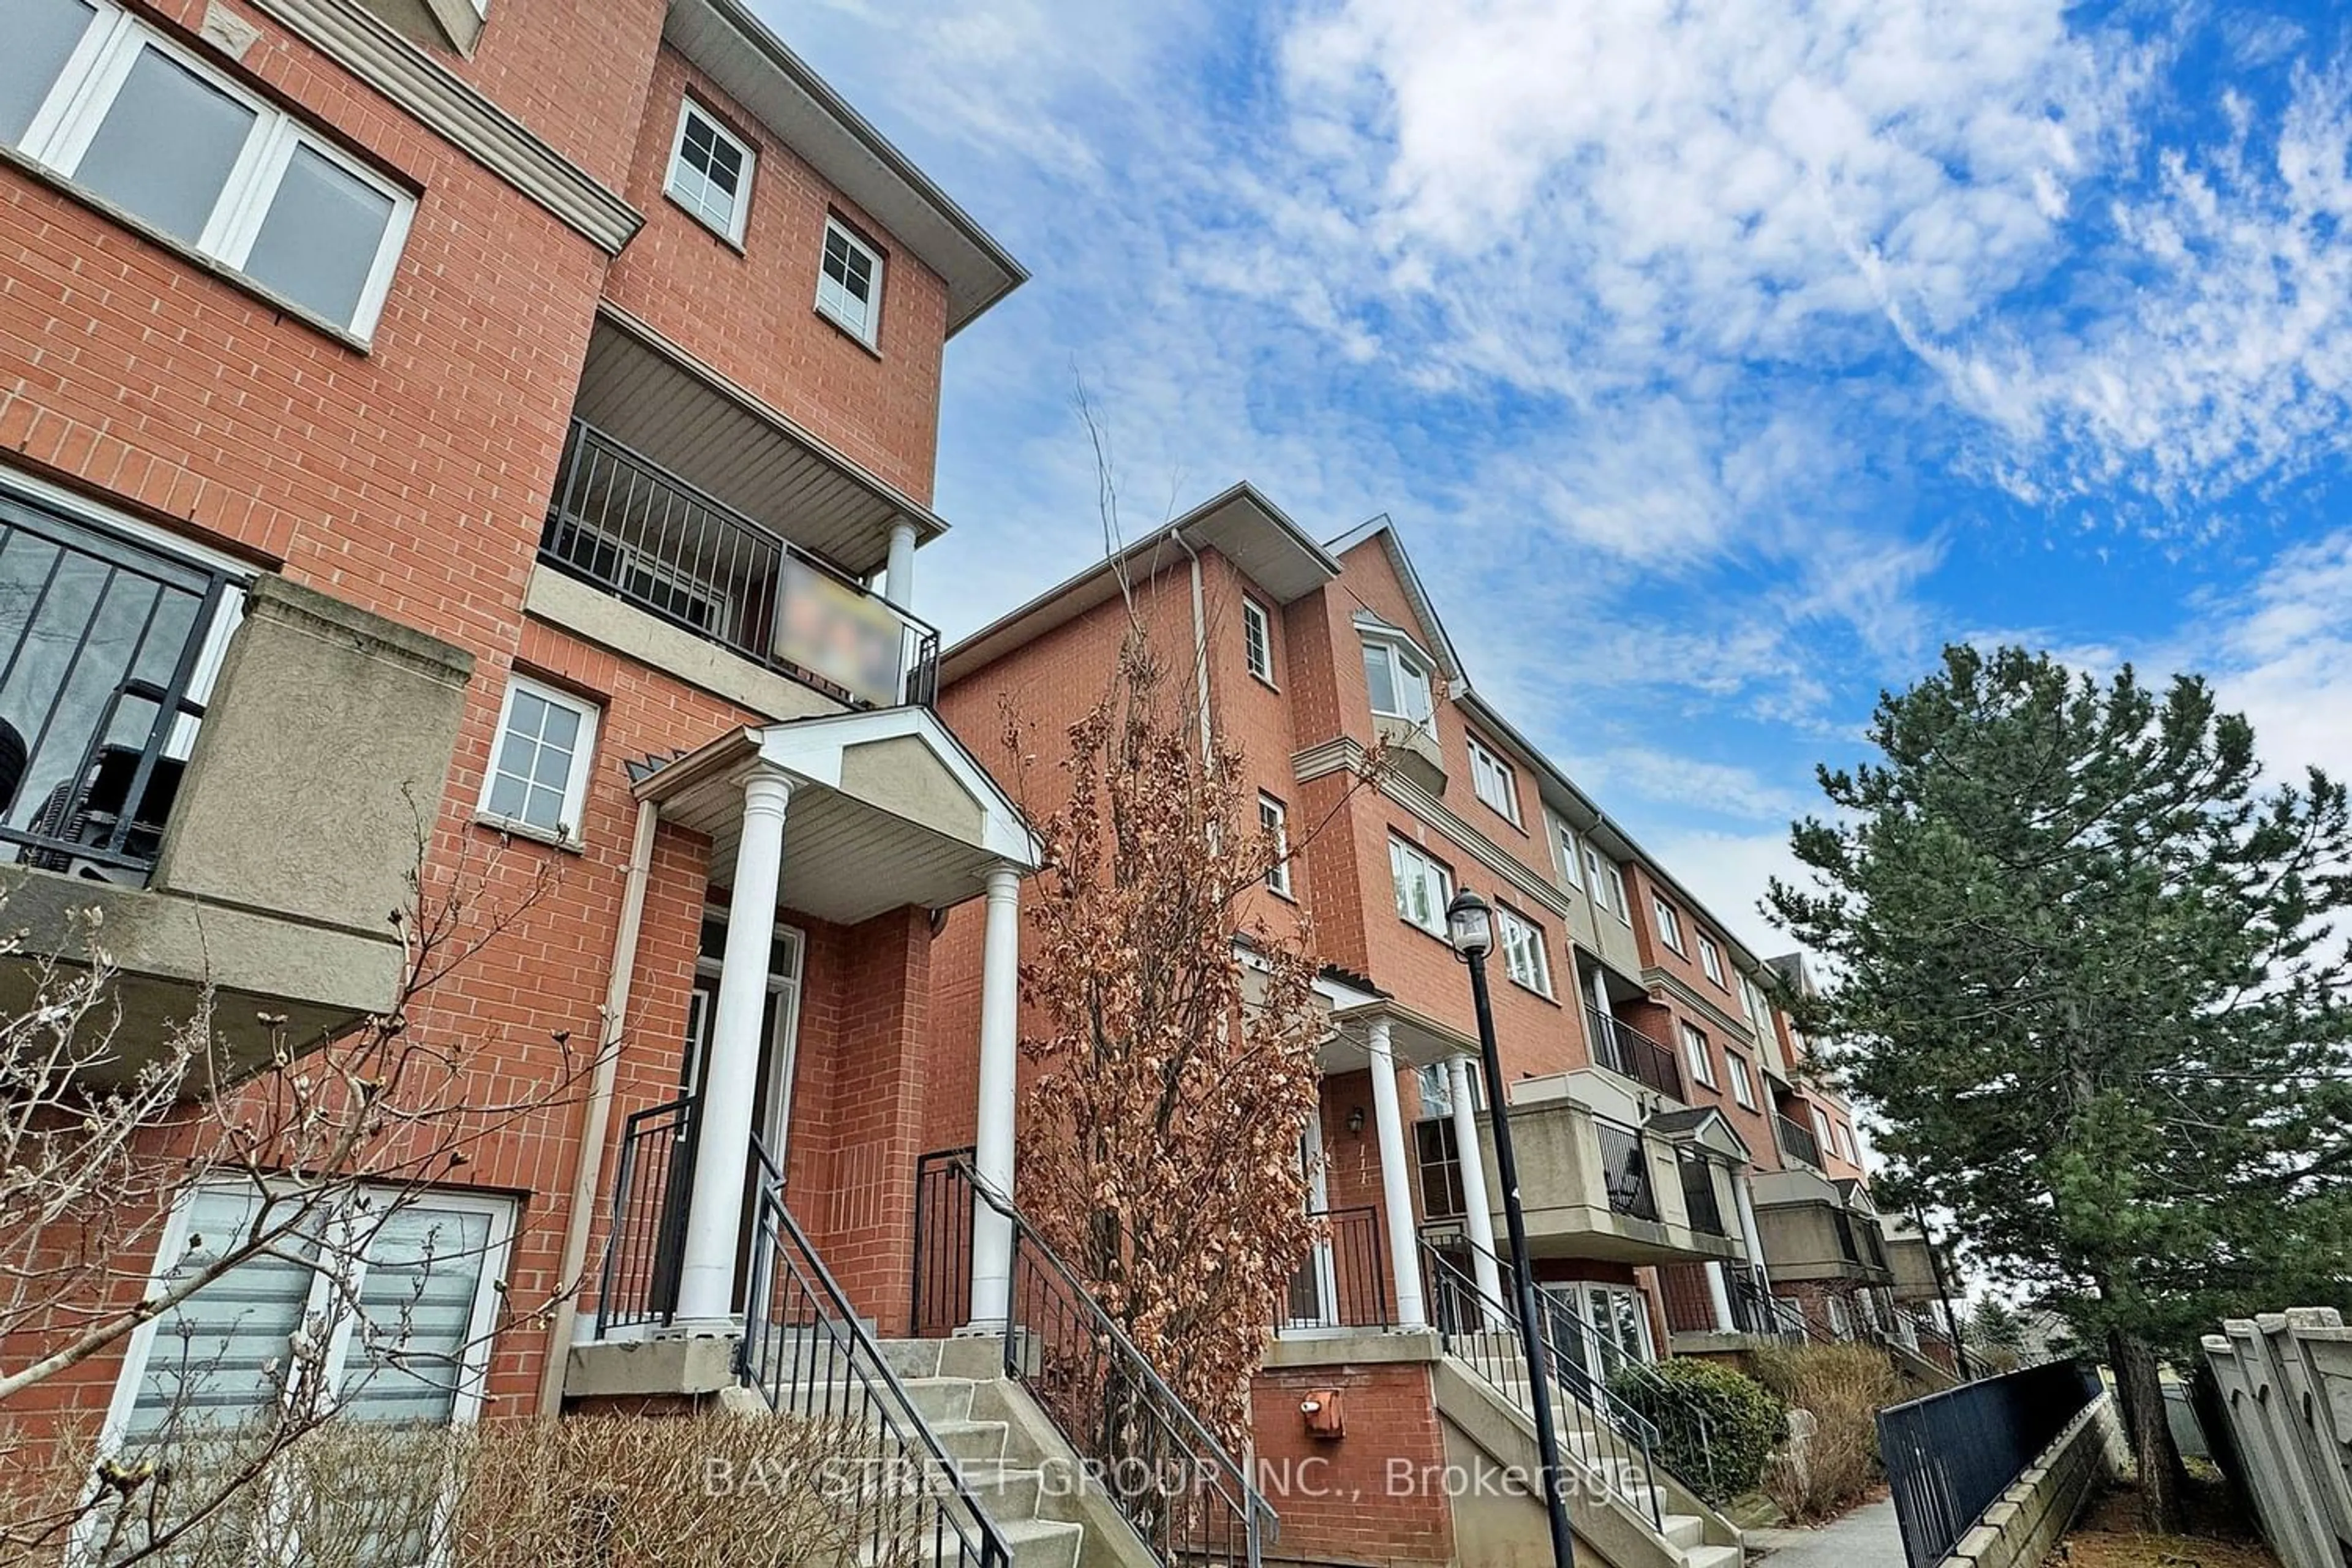 A pic from exterior of the house or condo for 1881 Mcnicoll Ave #233, Toronto Ontario M1V 5M2